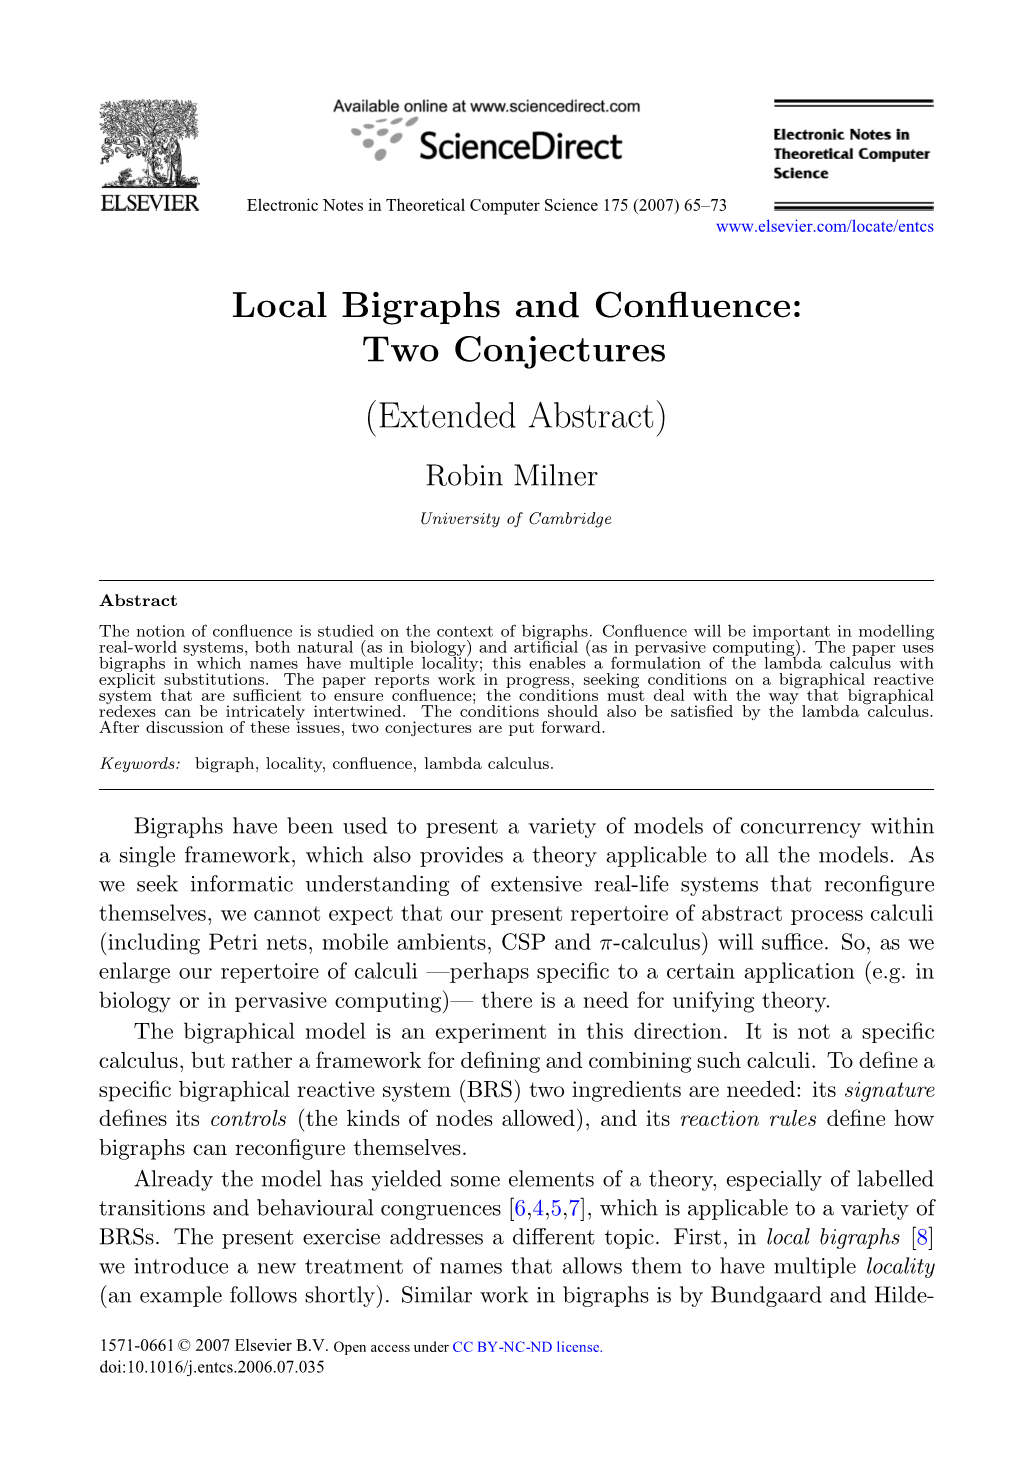 Local Bigraphs and Confluence